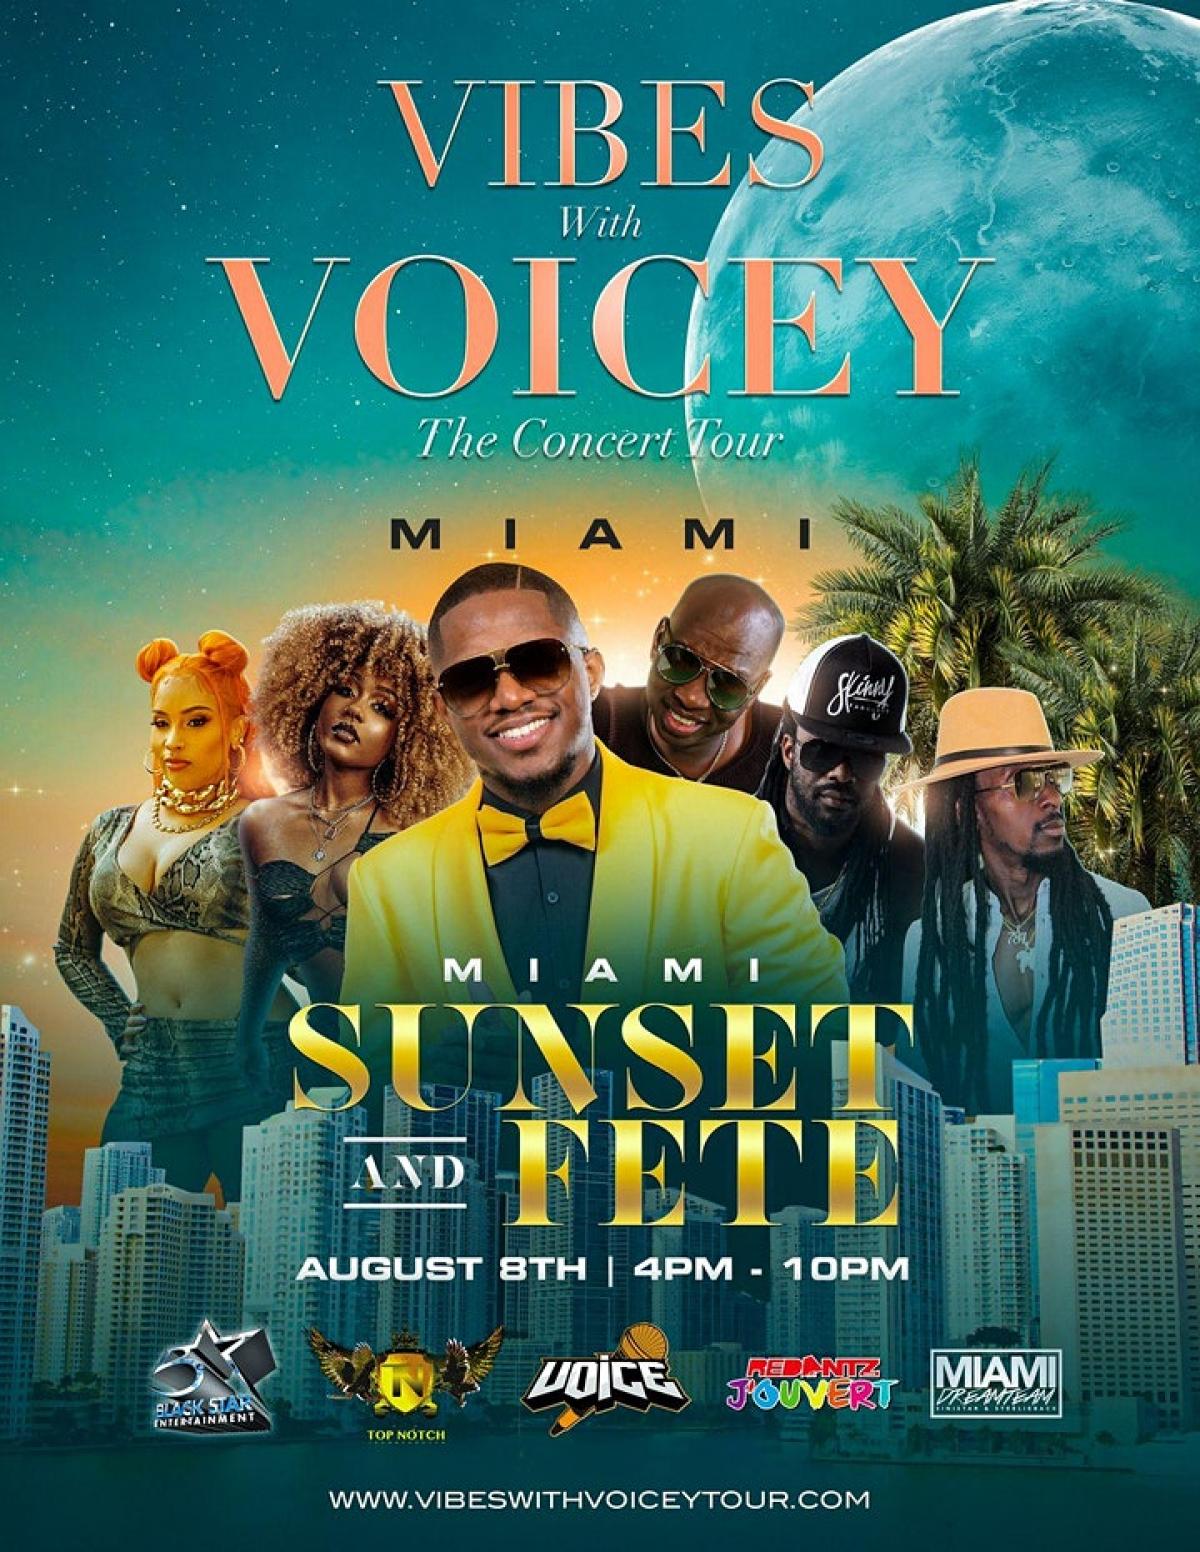 Vibes With Voicey: The Concert Tour Miami flyer or graphic.